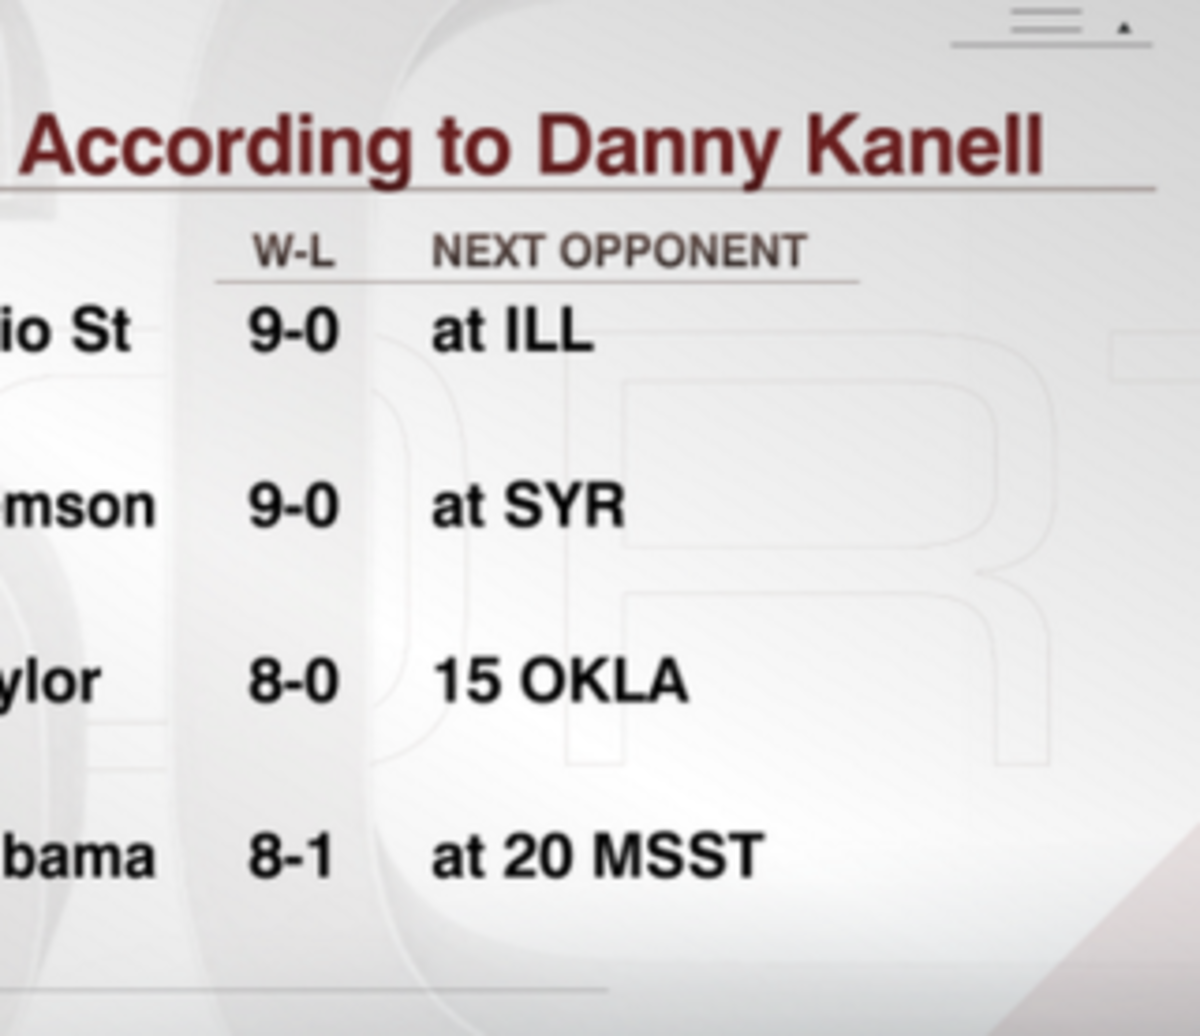 Danny Kanell's ESPN top four college football teams.